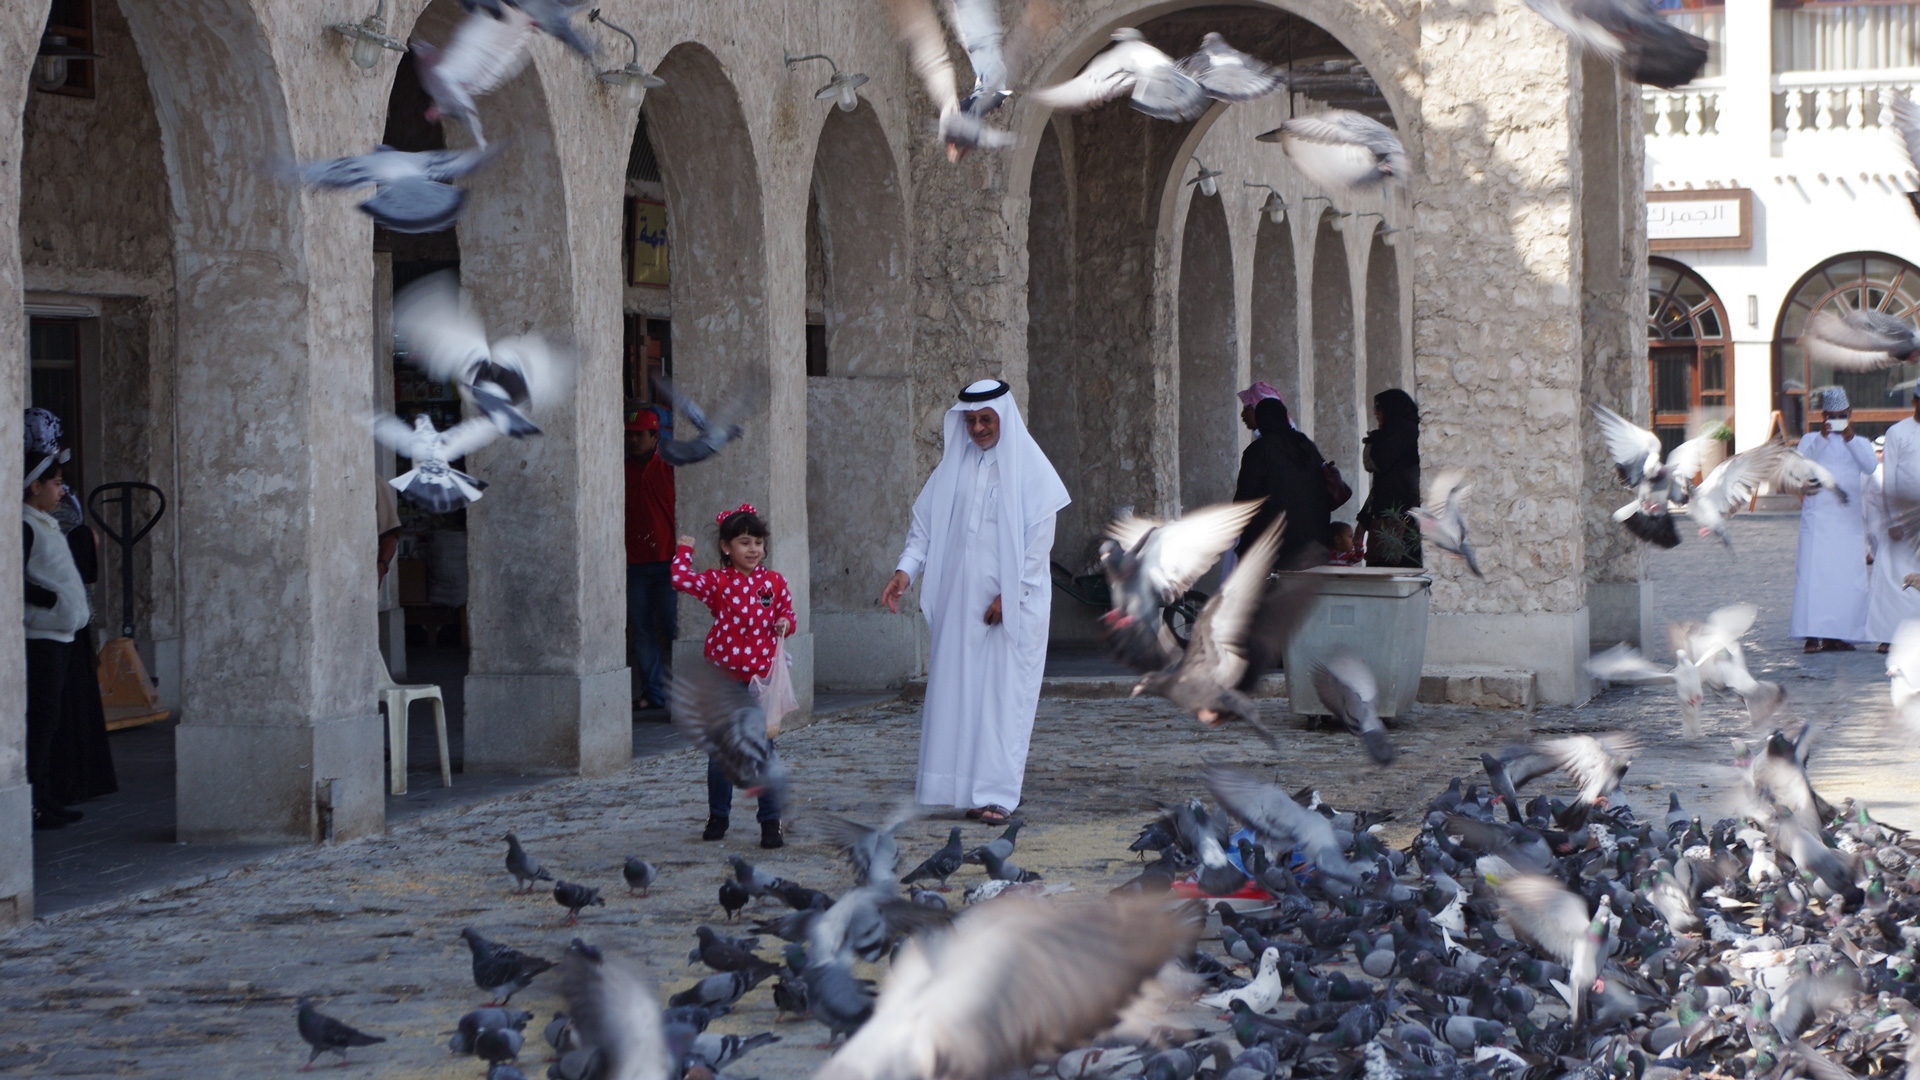 A man and girl feed pigeons in Doha, the capital of Qatar.